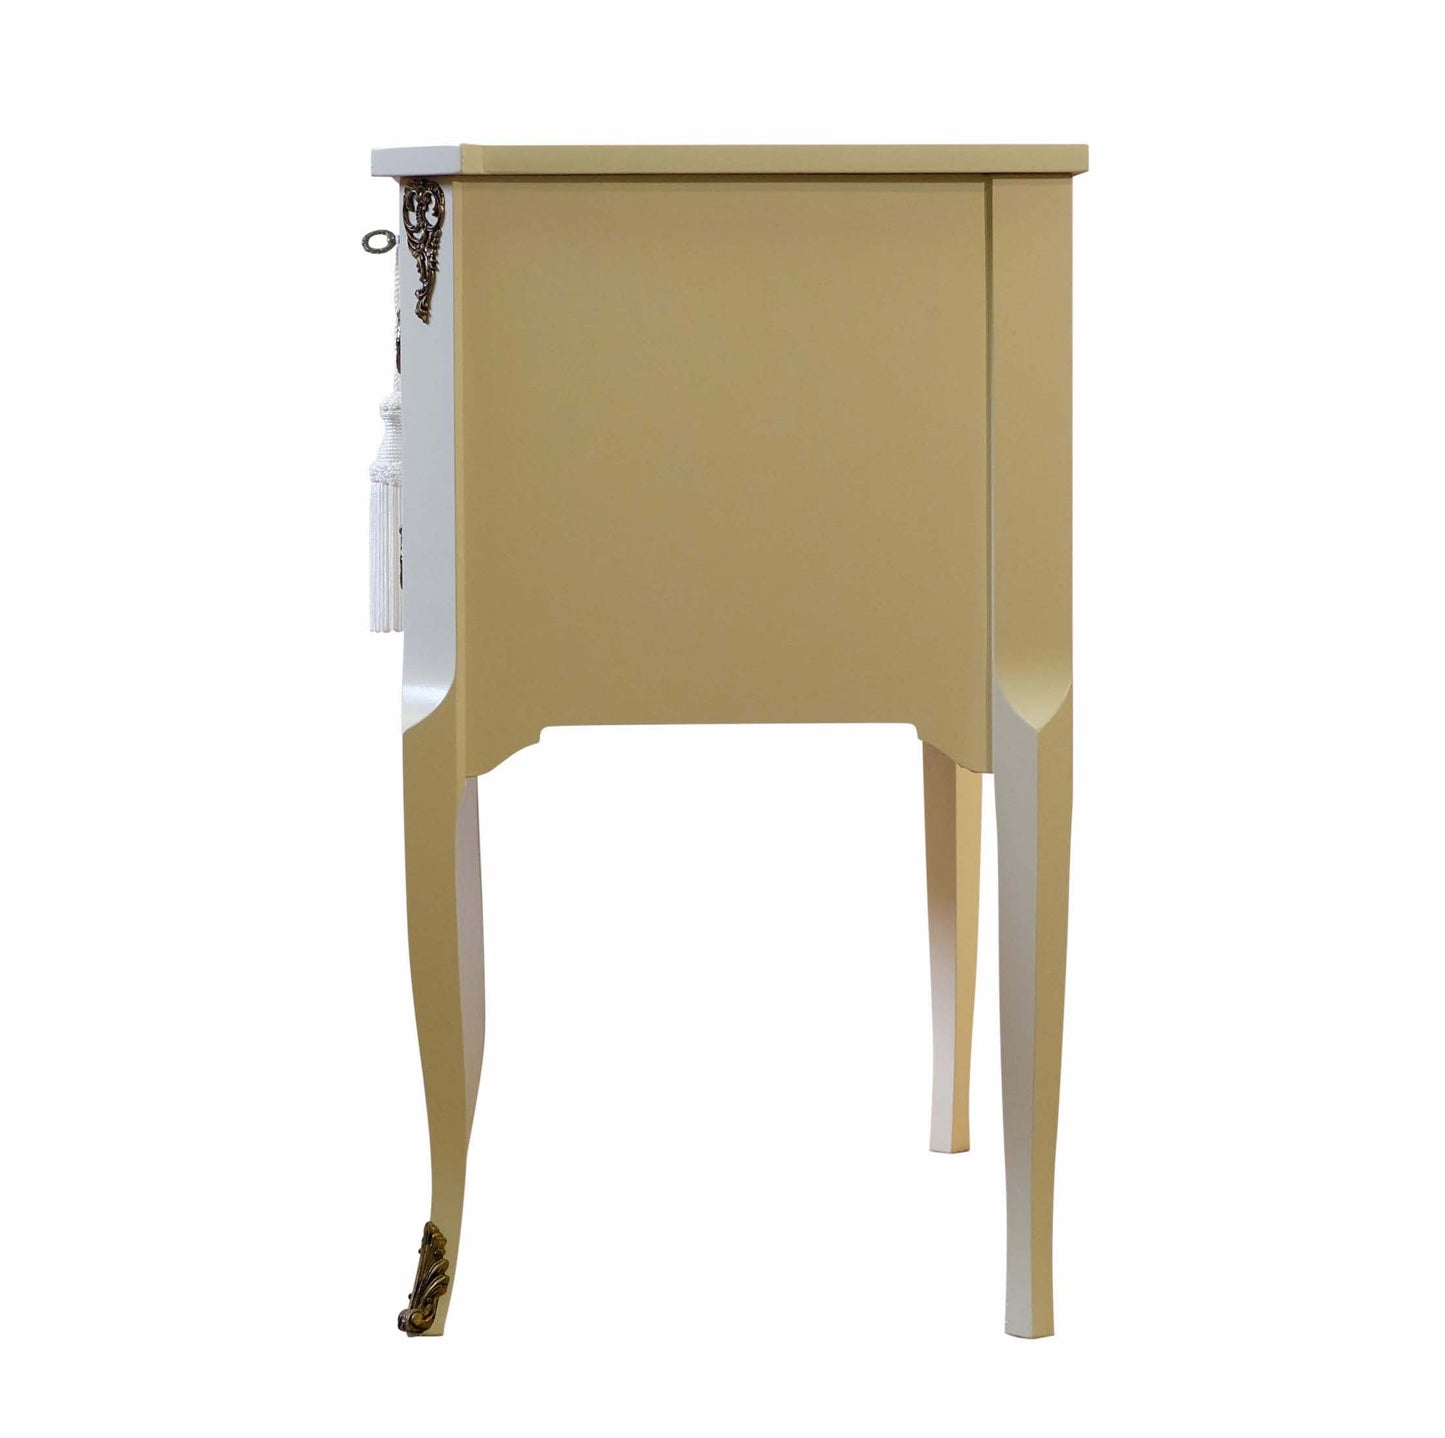 Gustavian Style Commode in Calming Cream with Brass Details (Pair)